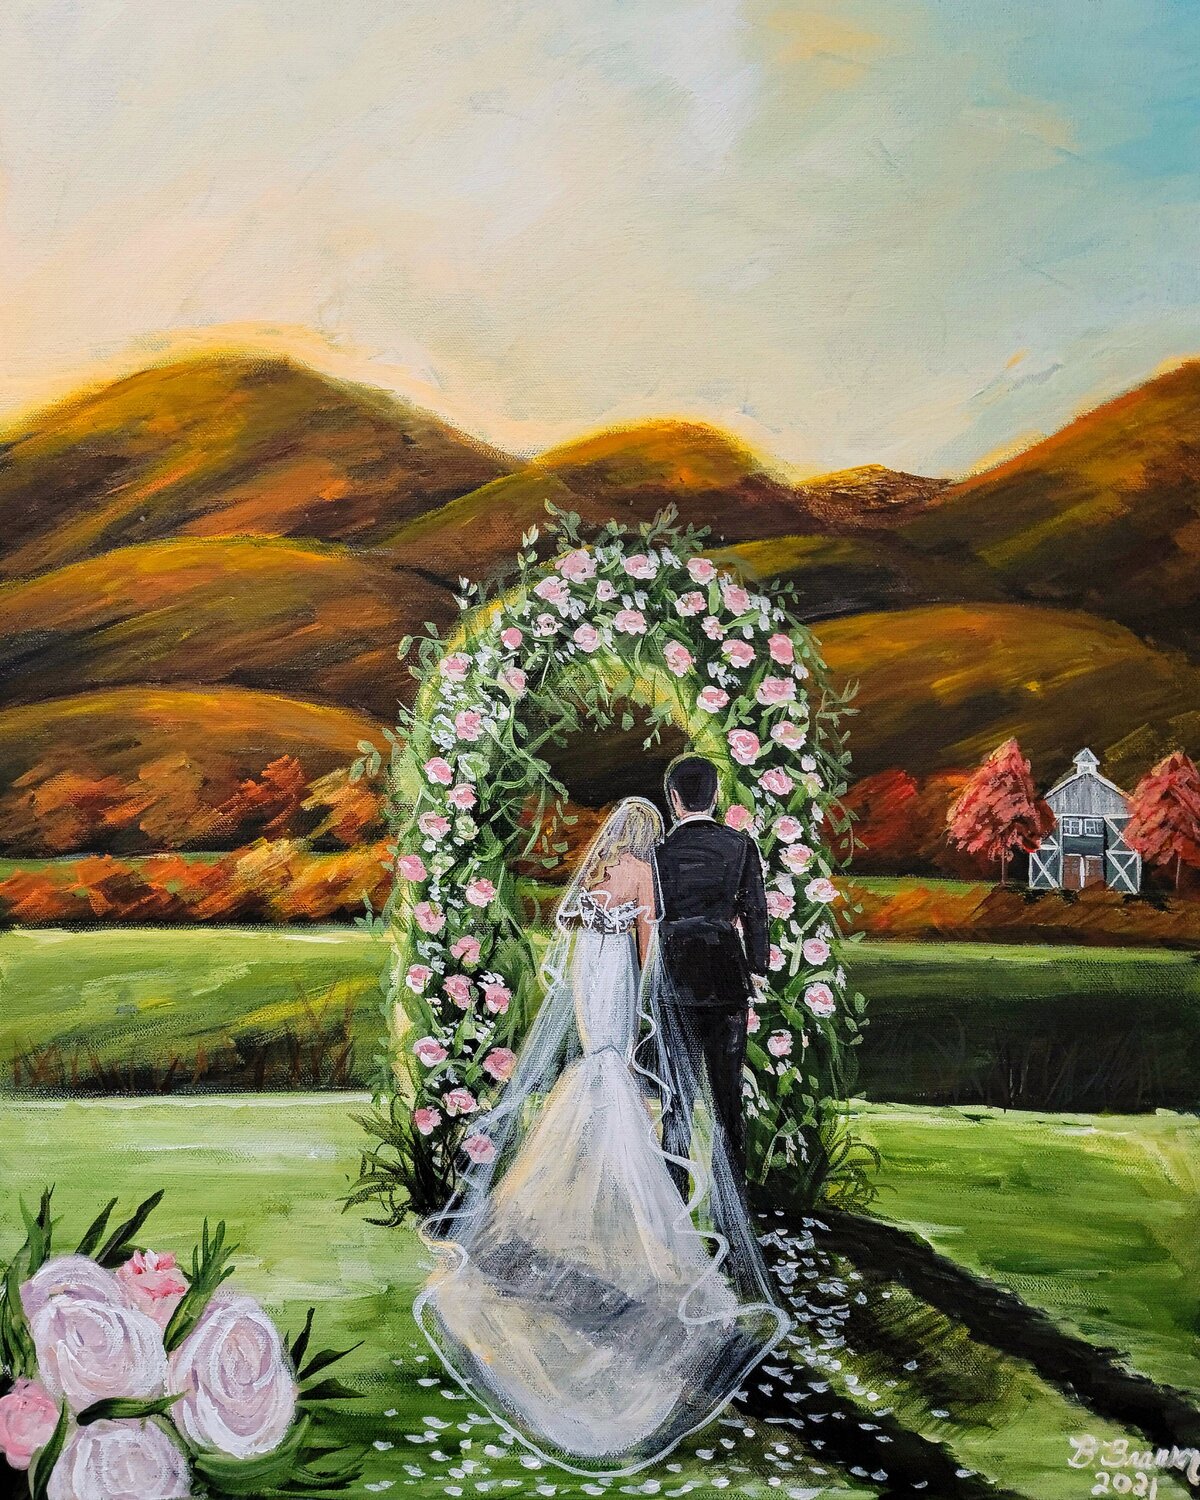 One of my favorite barn venues in the country! Love this unique view of the mountains with the farmhouse in the background for this live wedding painting.